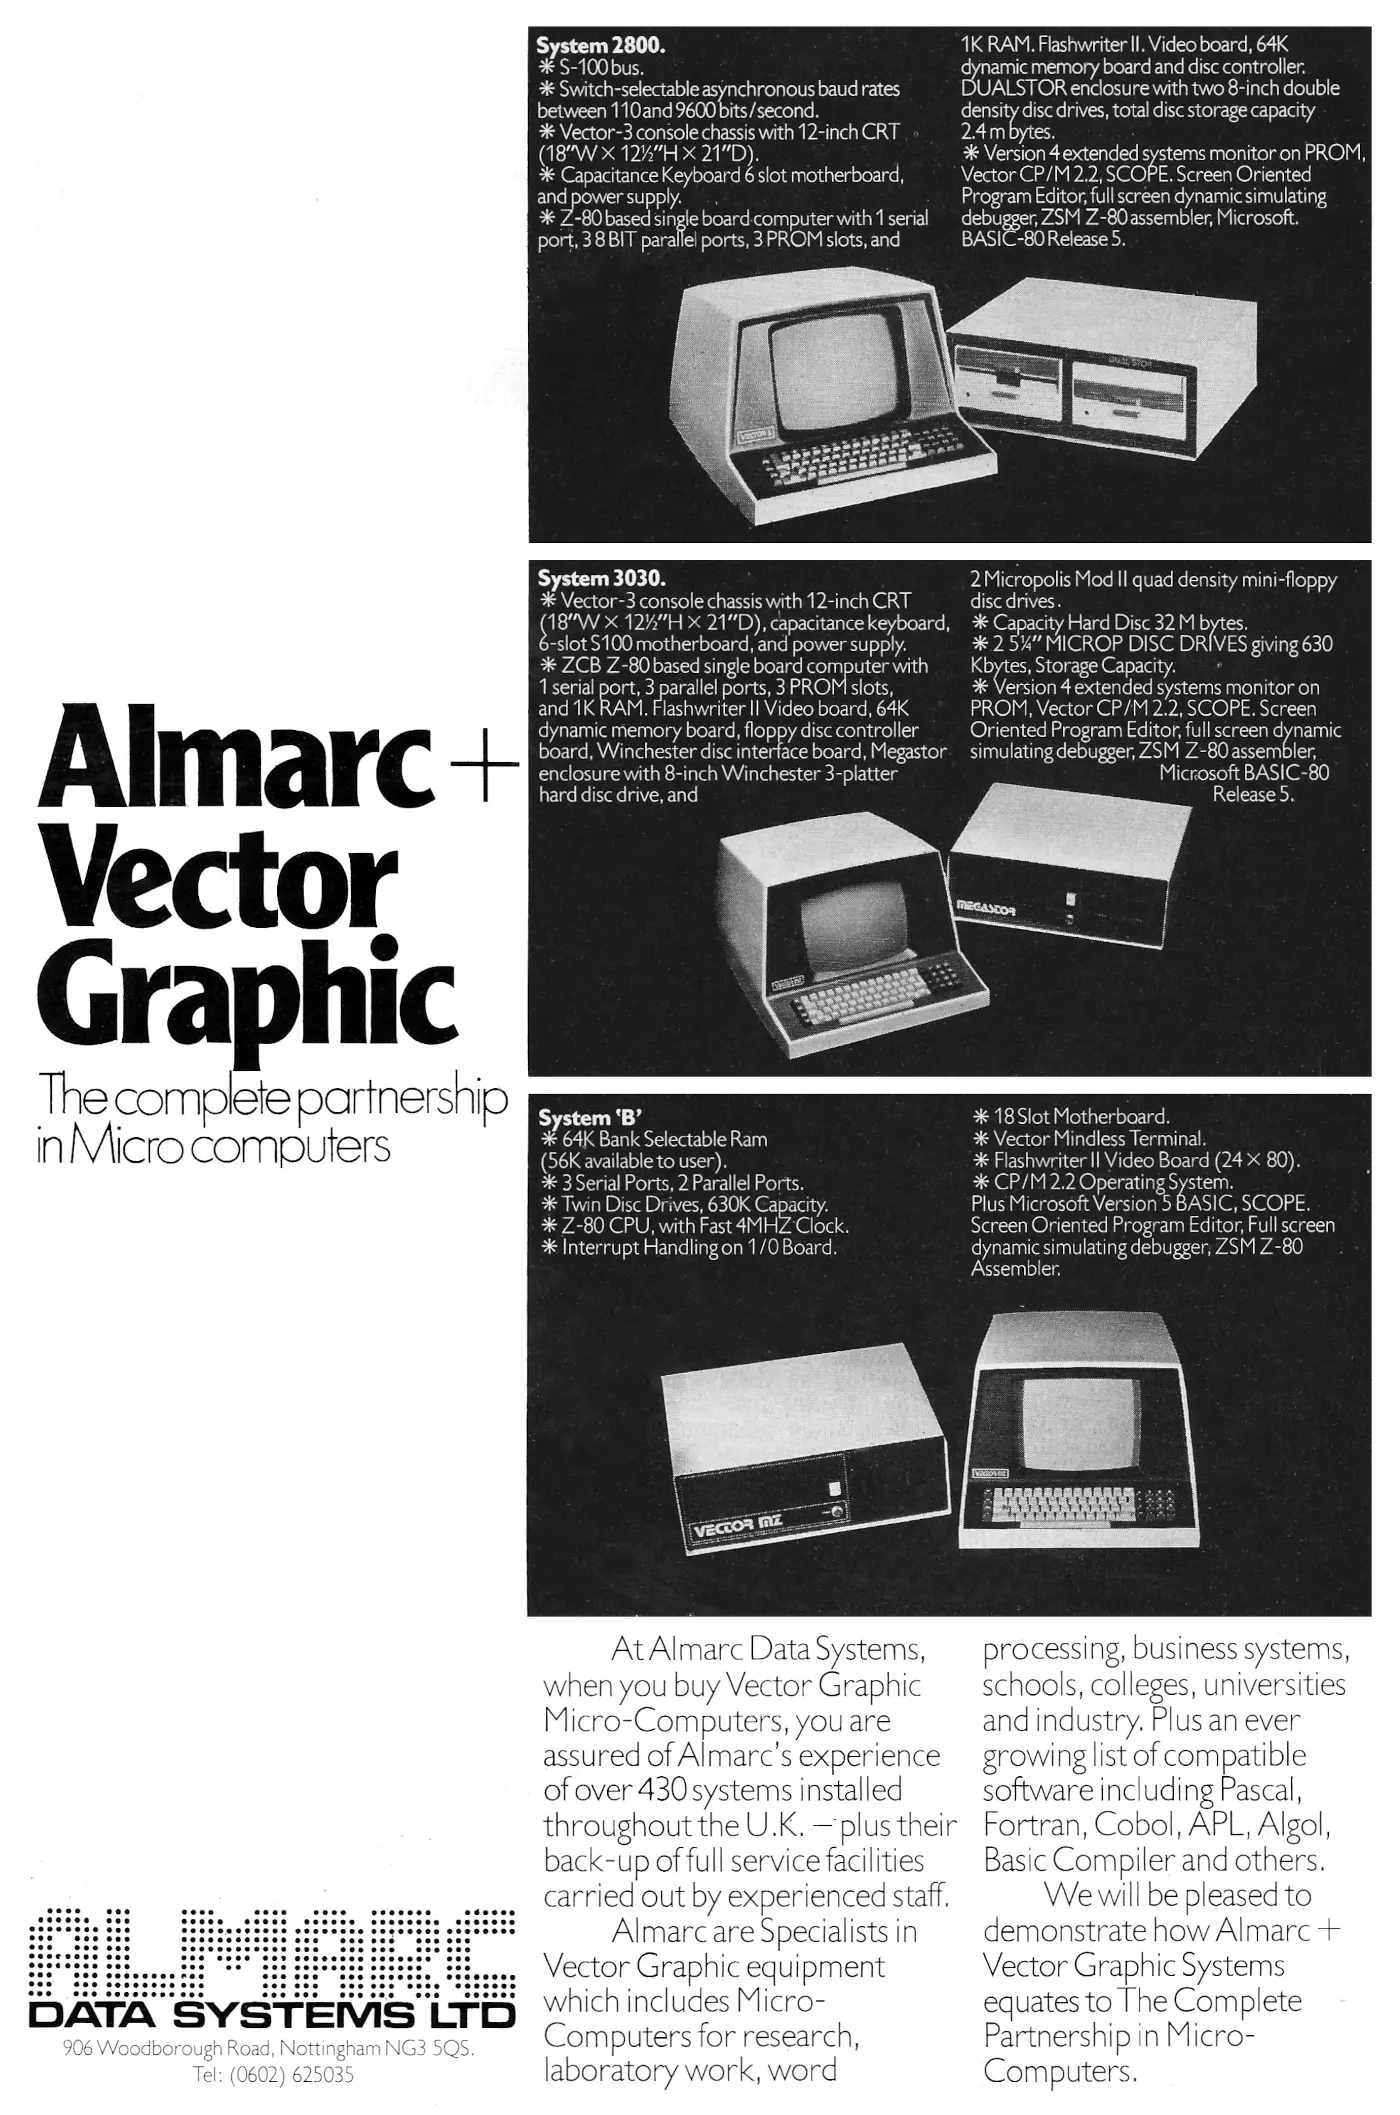 Vector Graphic Advert: Almarc and Vector Graphic - the complete partnership in microcomputers, from Personal Computer World, January 1981